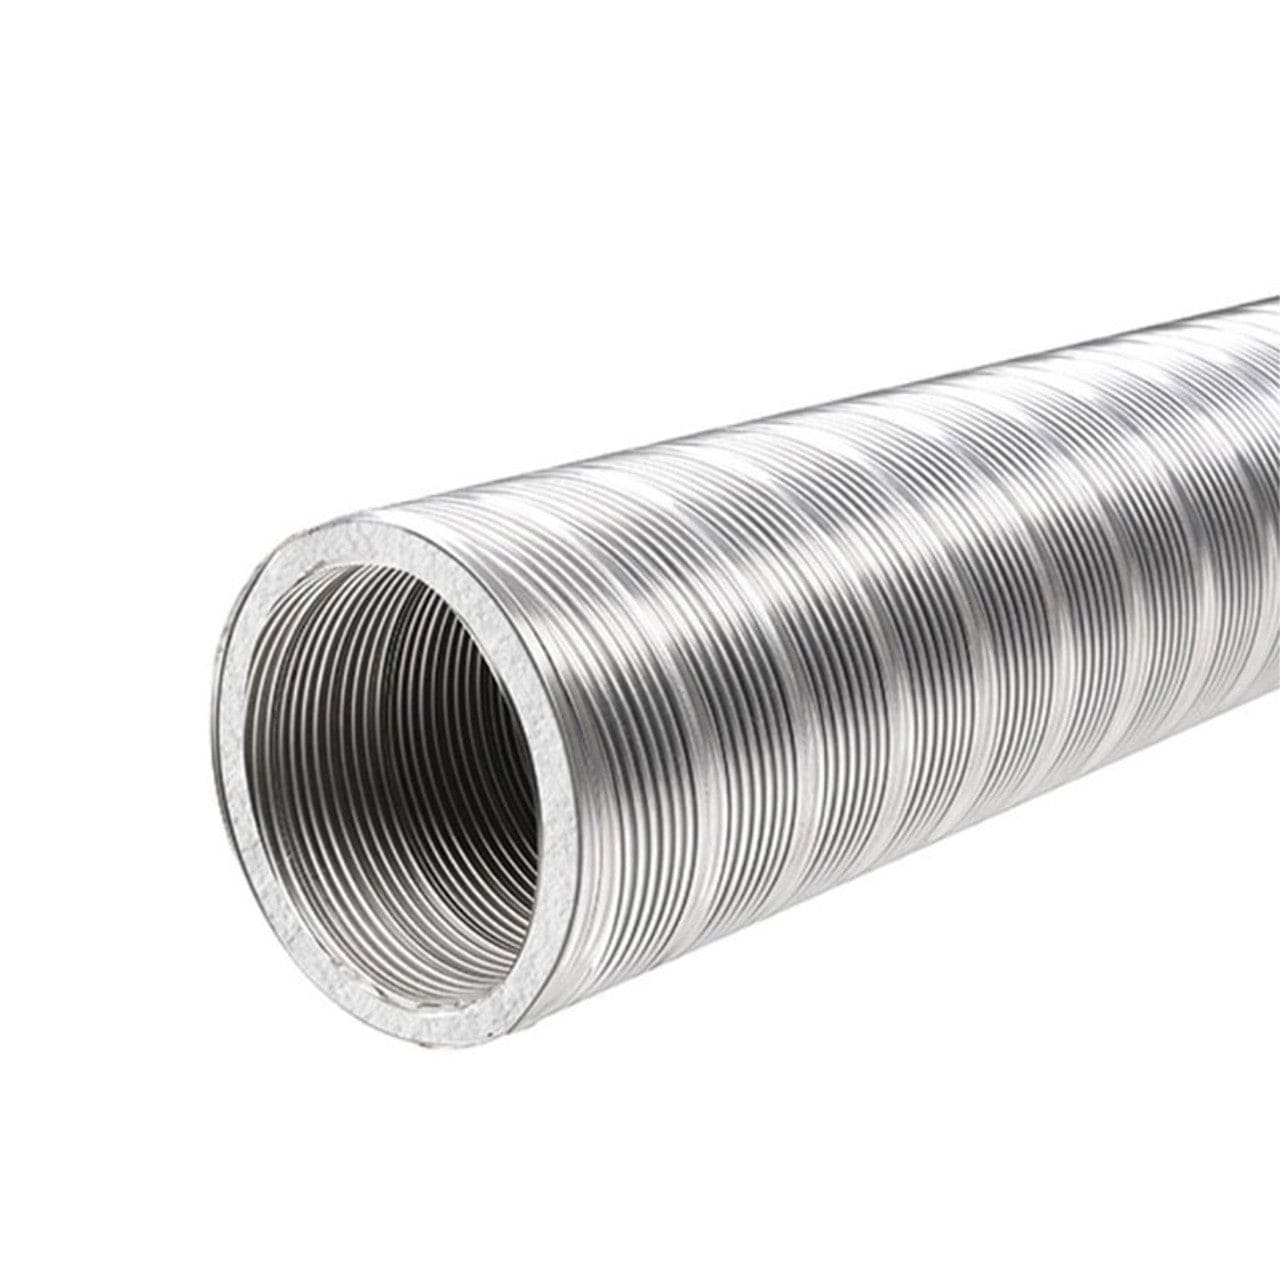 (DS) - 9" Premium Pre-Insulated Forever Flex 316Ti-Alloy .005 Stainless Cut-to-Length Liner -L5S9PI - Chimney Cricket